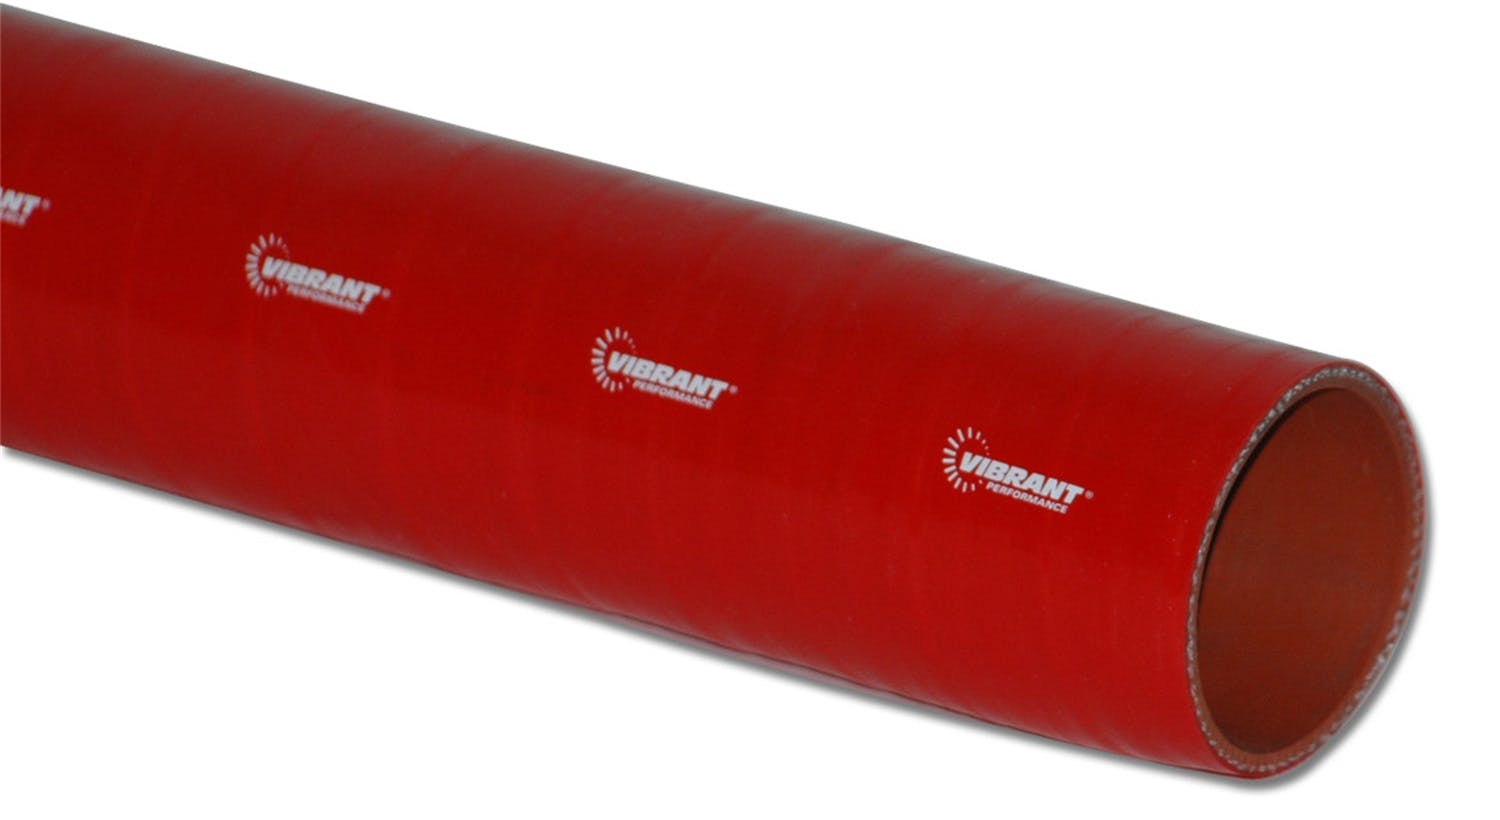 Vibrant Performance 27011R 4 Ply Silicone Sleeve, 1 inch I.D. x 12 inch Long - Red